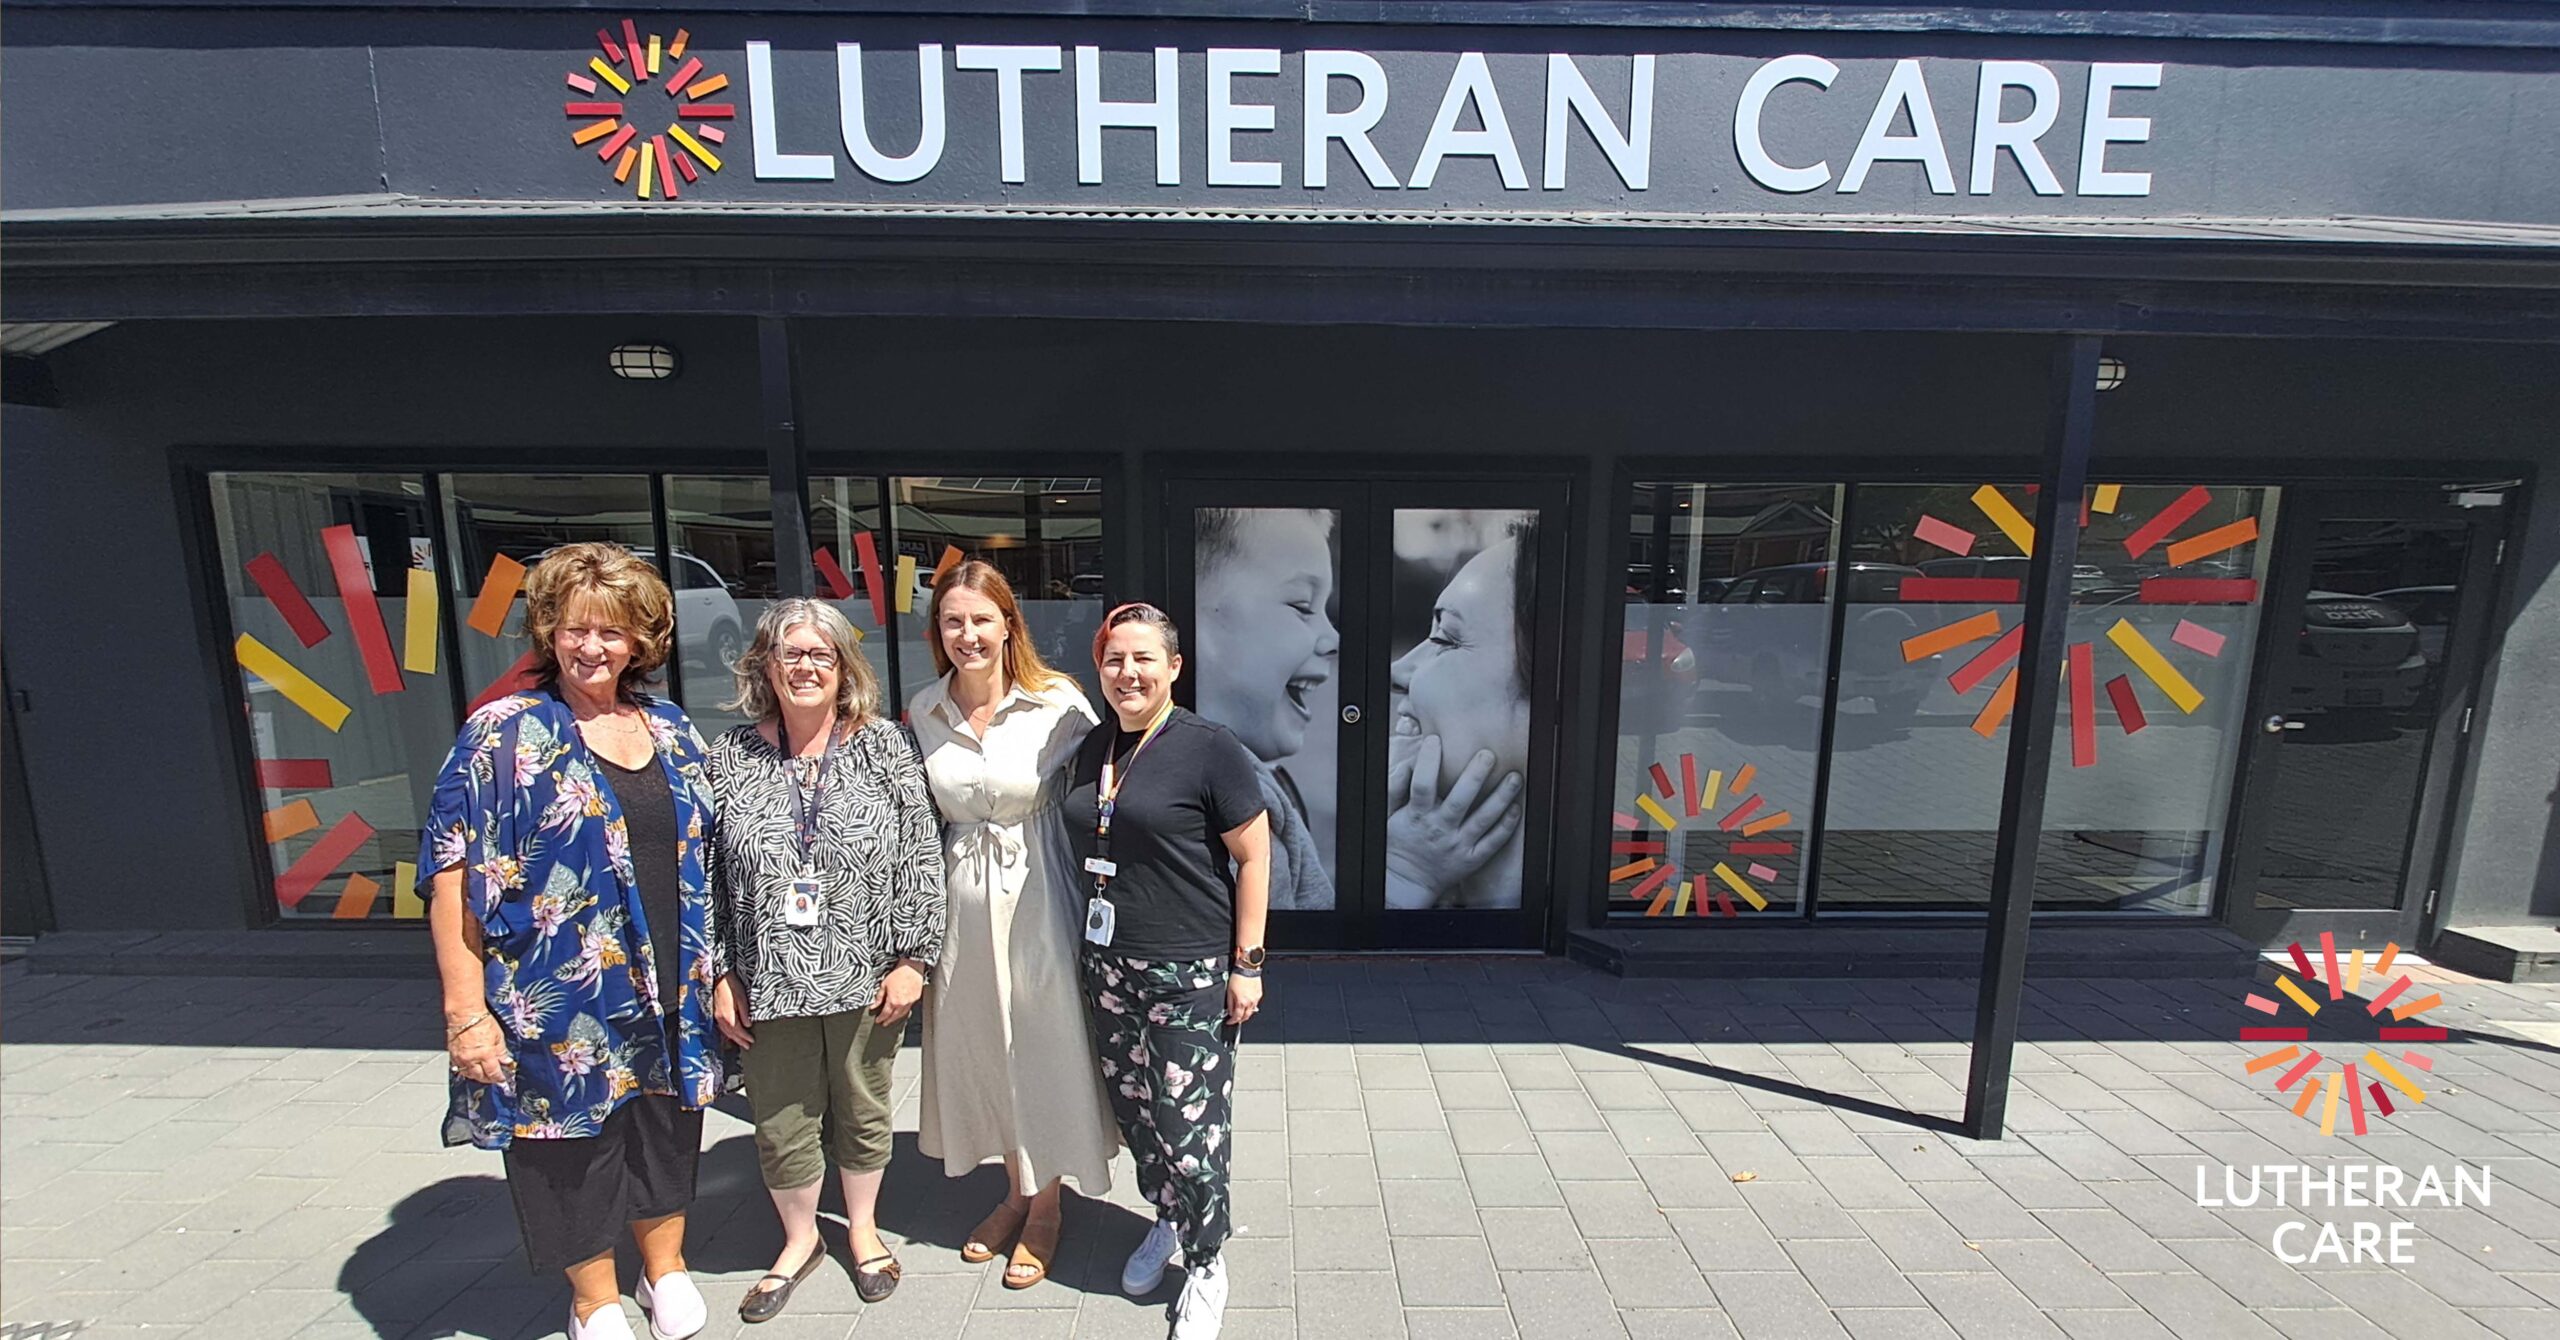 Lutheran Care Barossa staff outside of the new Tanunda office. The Lutheran Care logo appears in the bottom right hand corner.